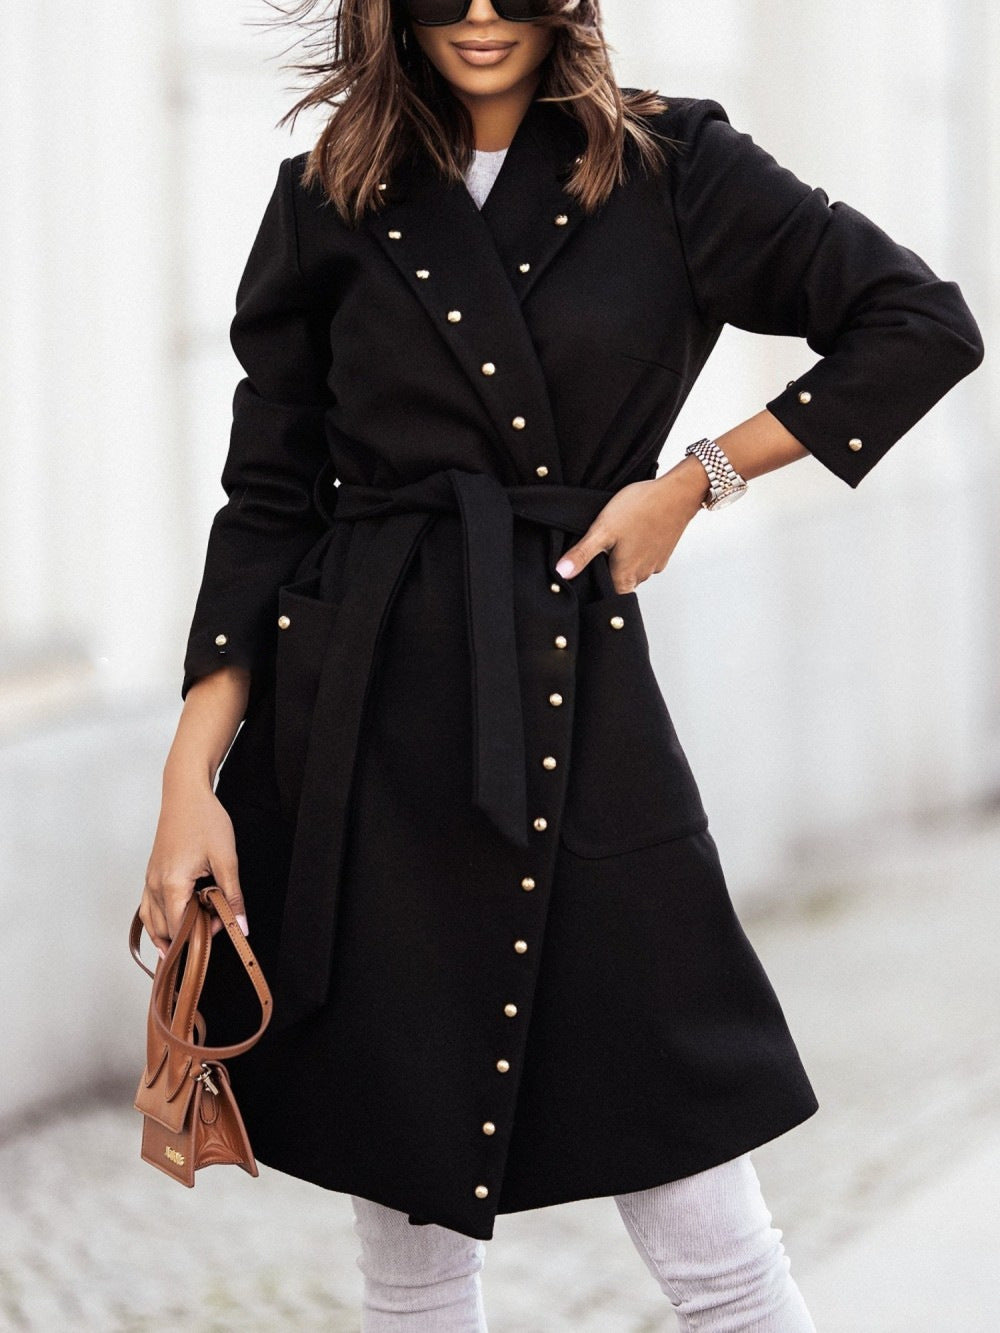 Simple Double Breasted Rivet Long Sleeve Coats